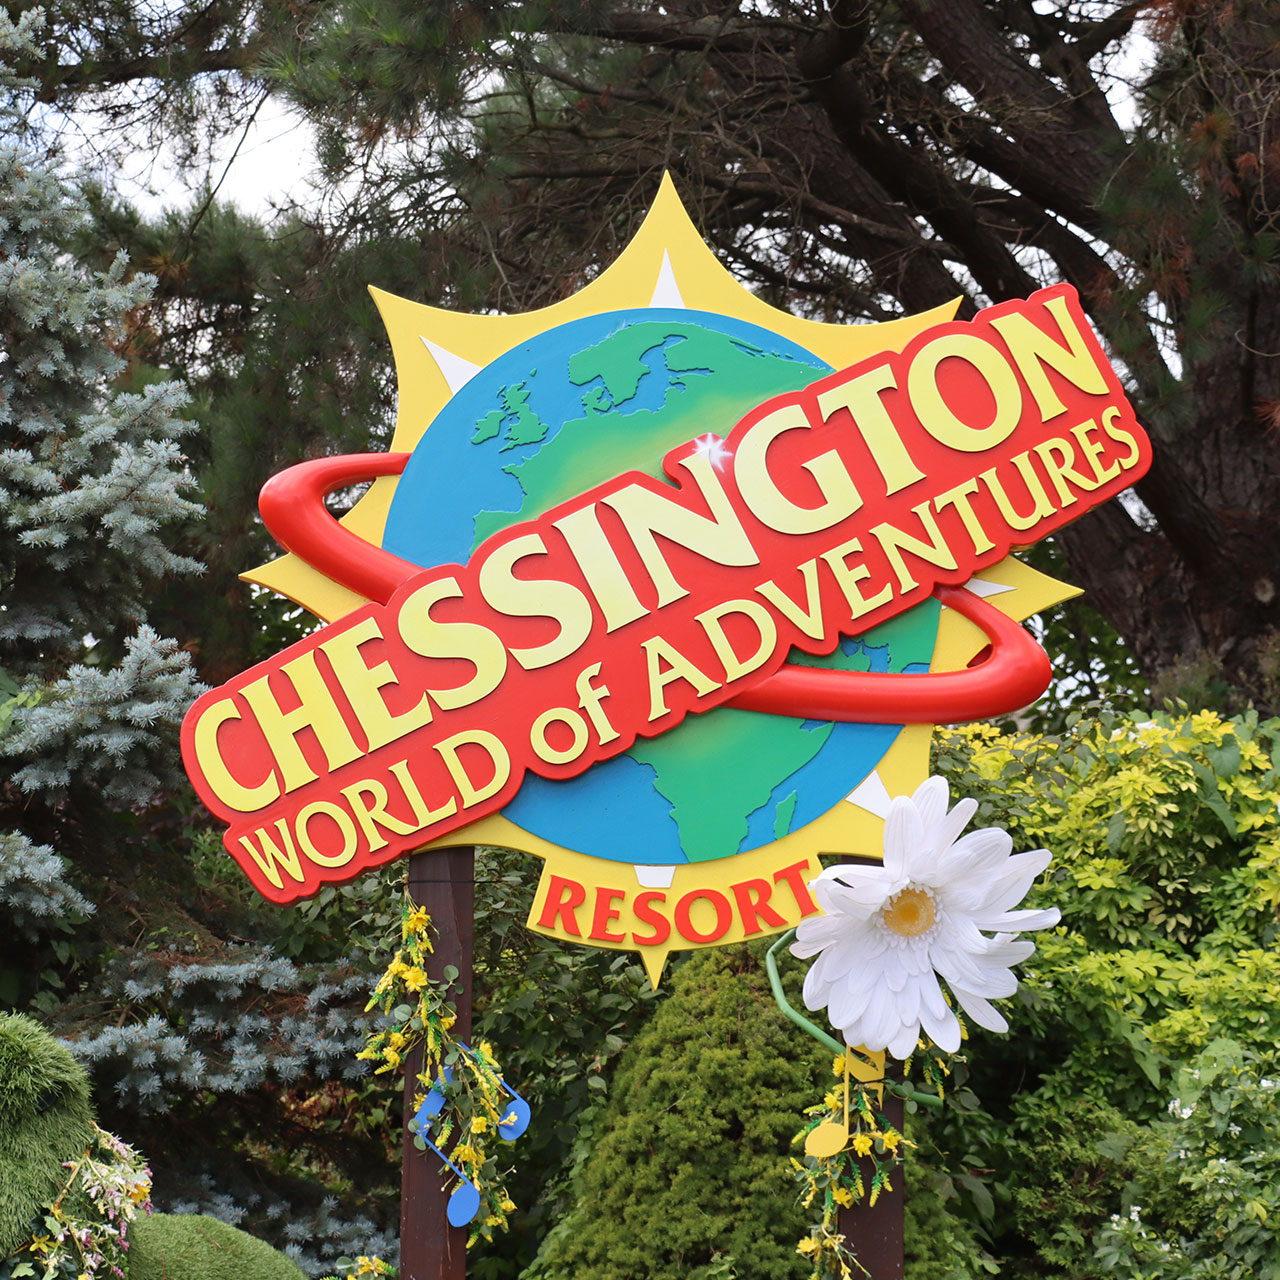 Chessington Clears Up At Awards